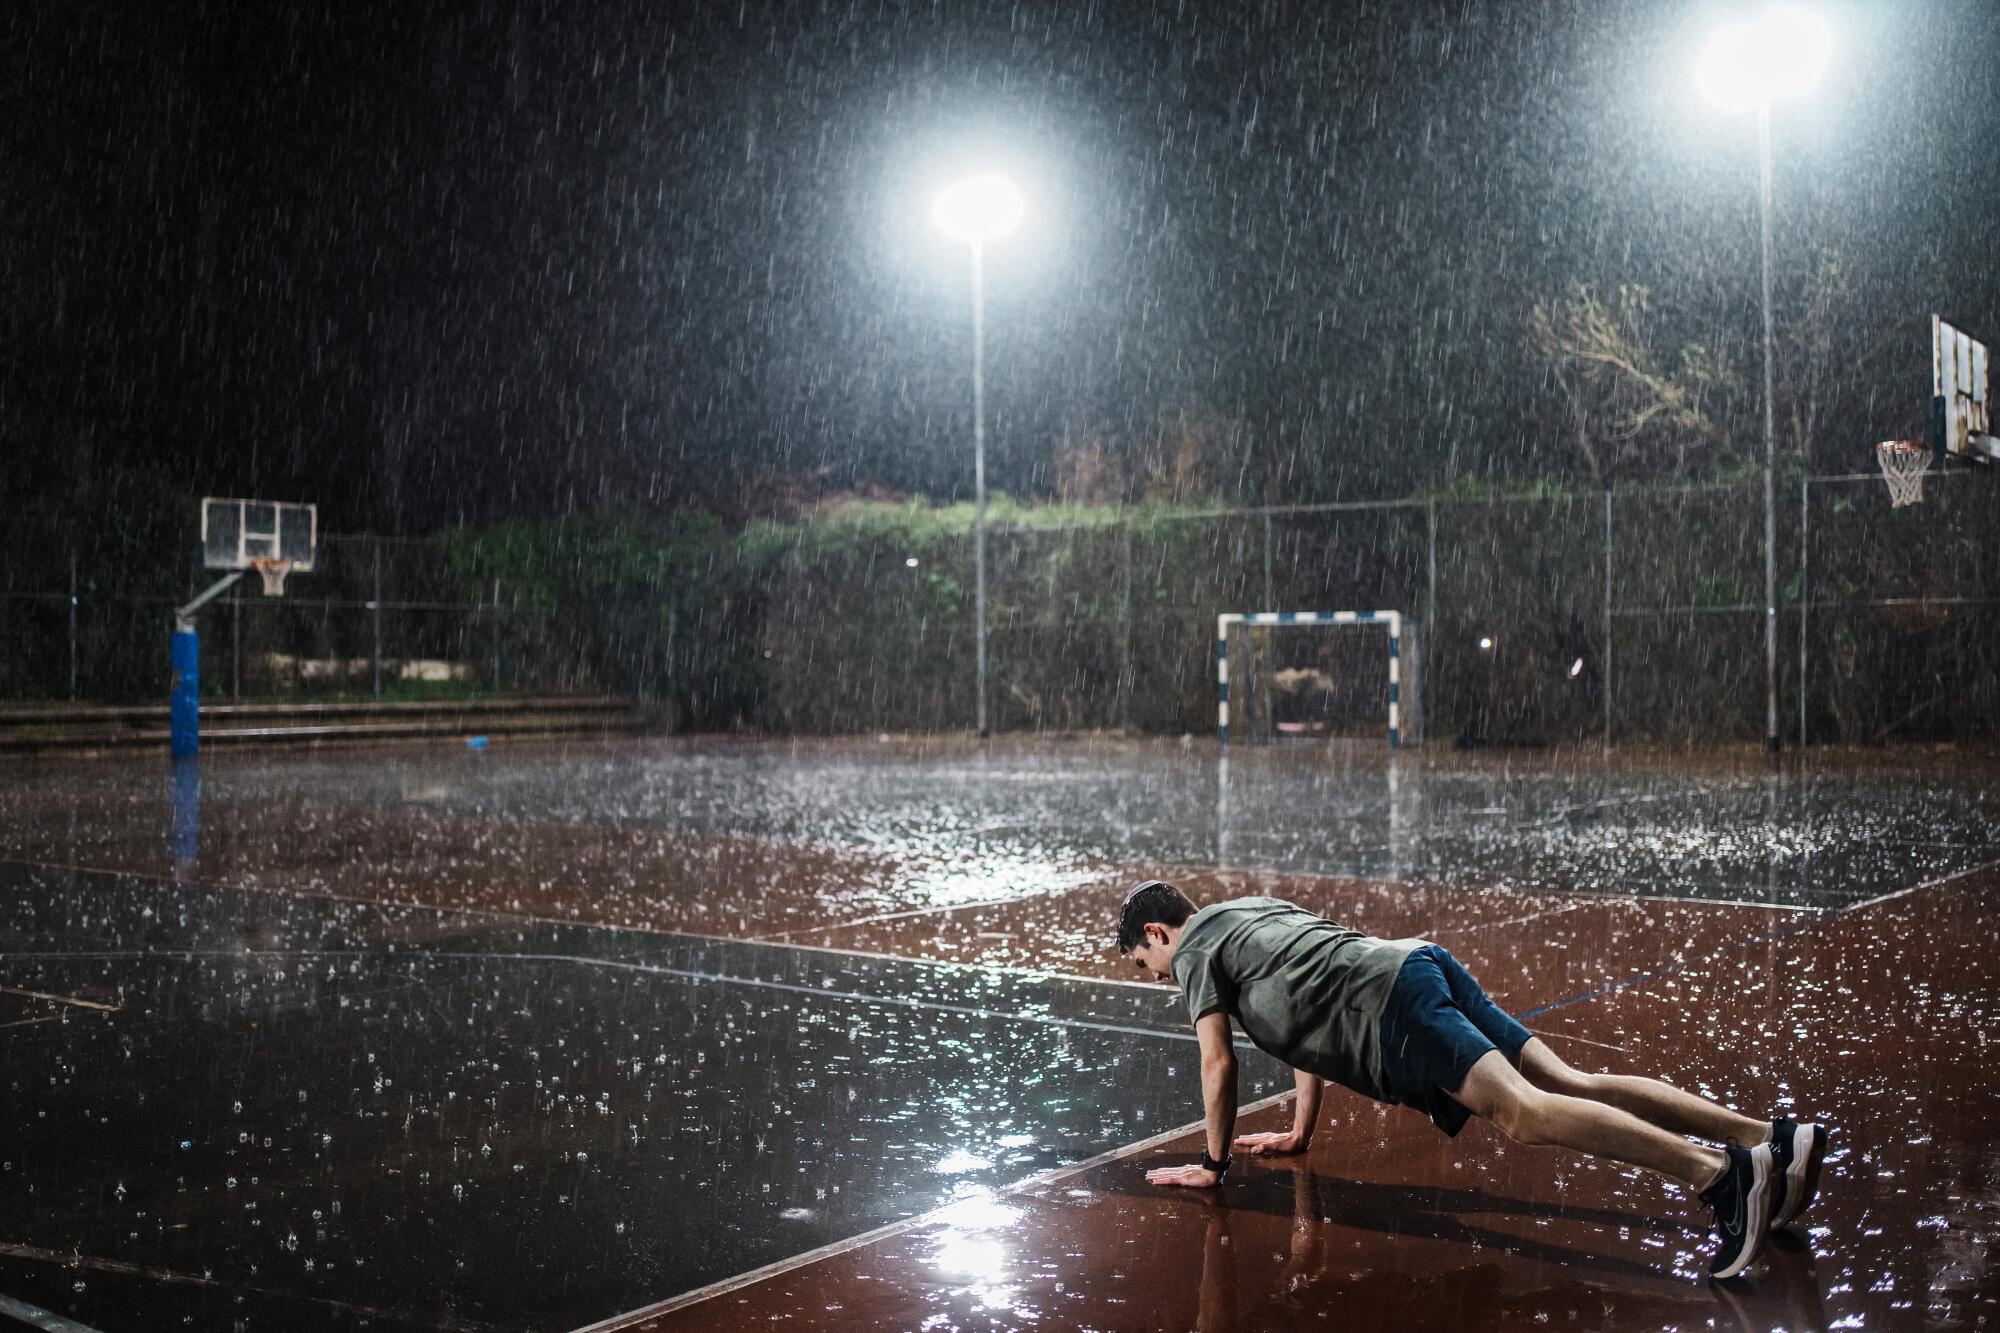 A young man wearing shorts does push-ups in the dark and rain on an athletic field. 